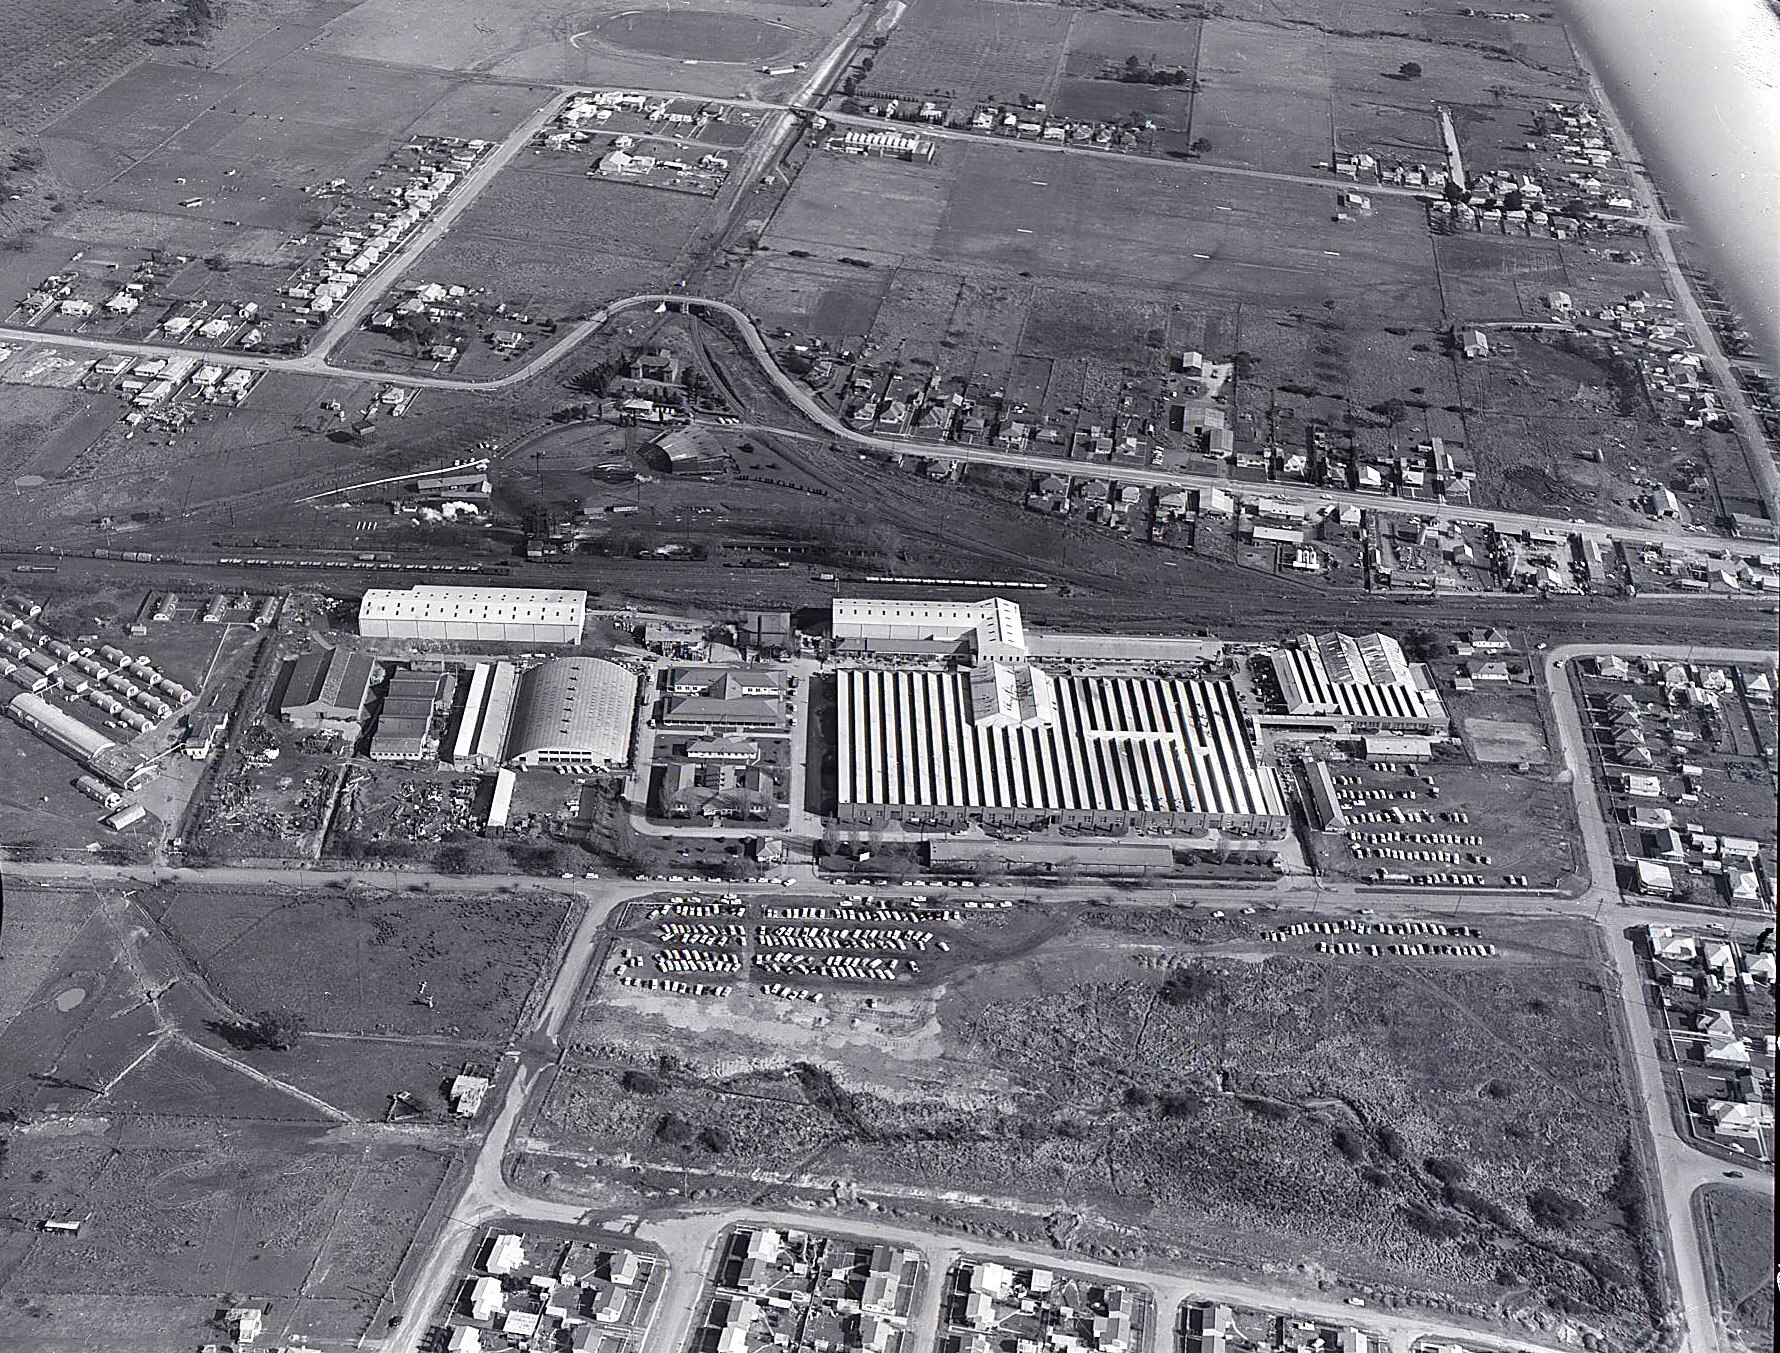 A black and white aerial shot of a factory surrounded by roads, houses and vacant land